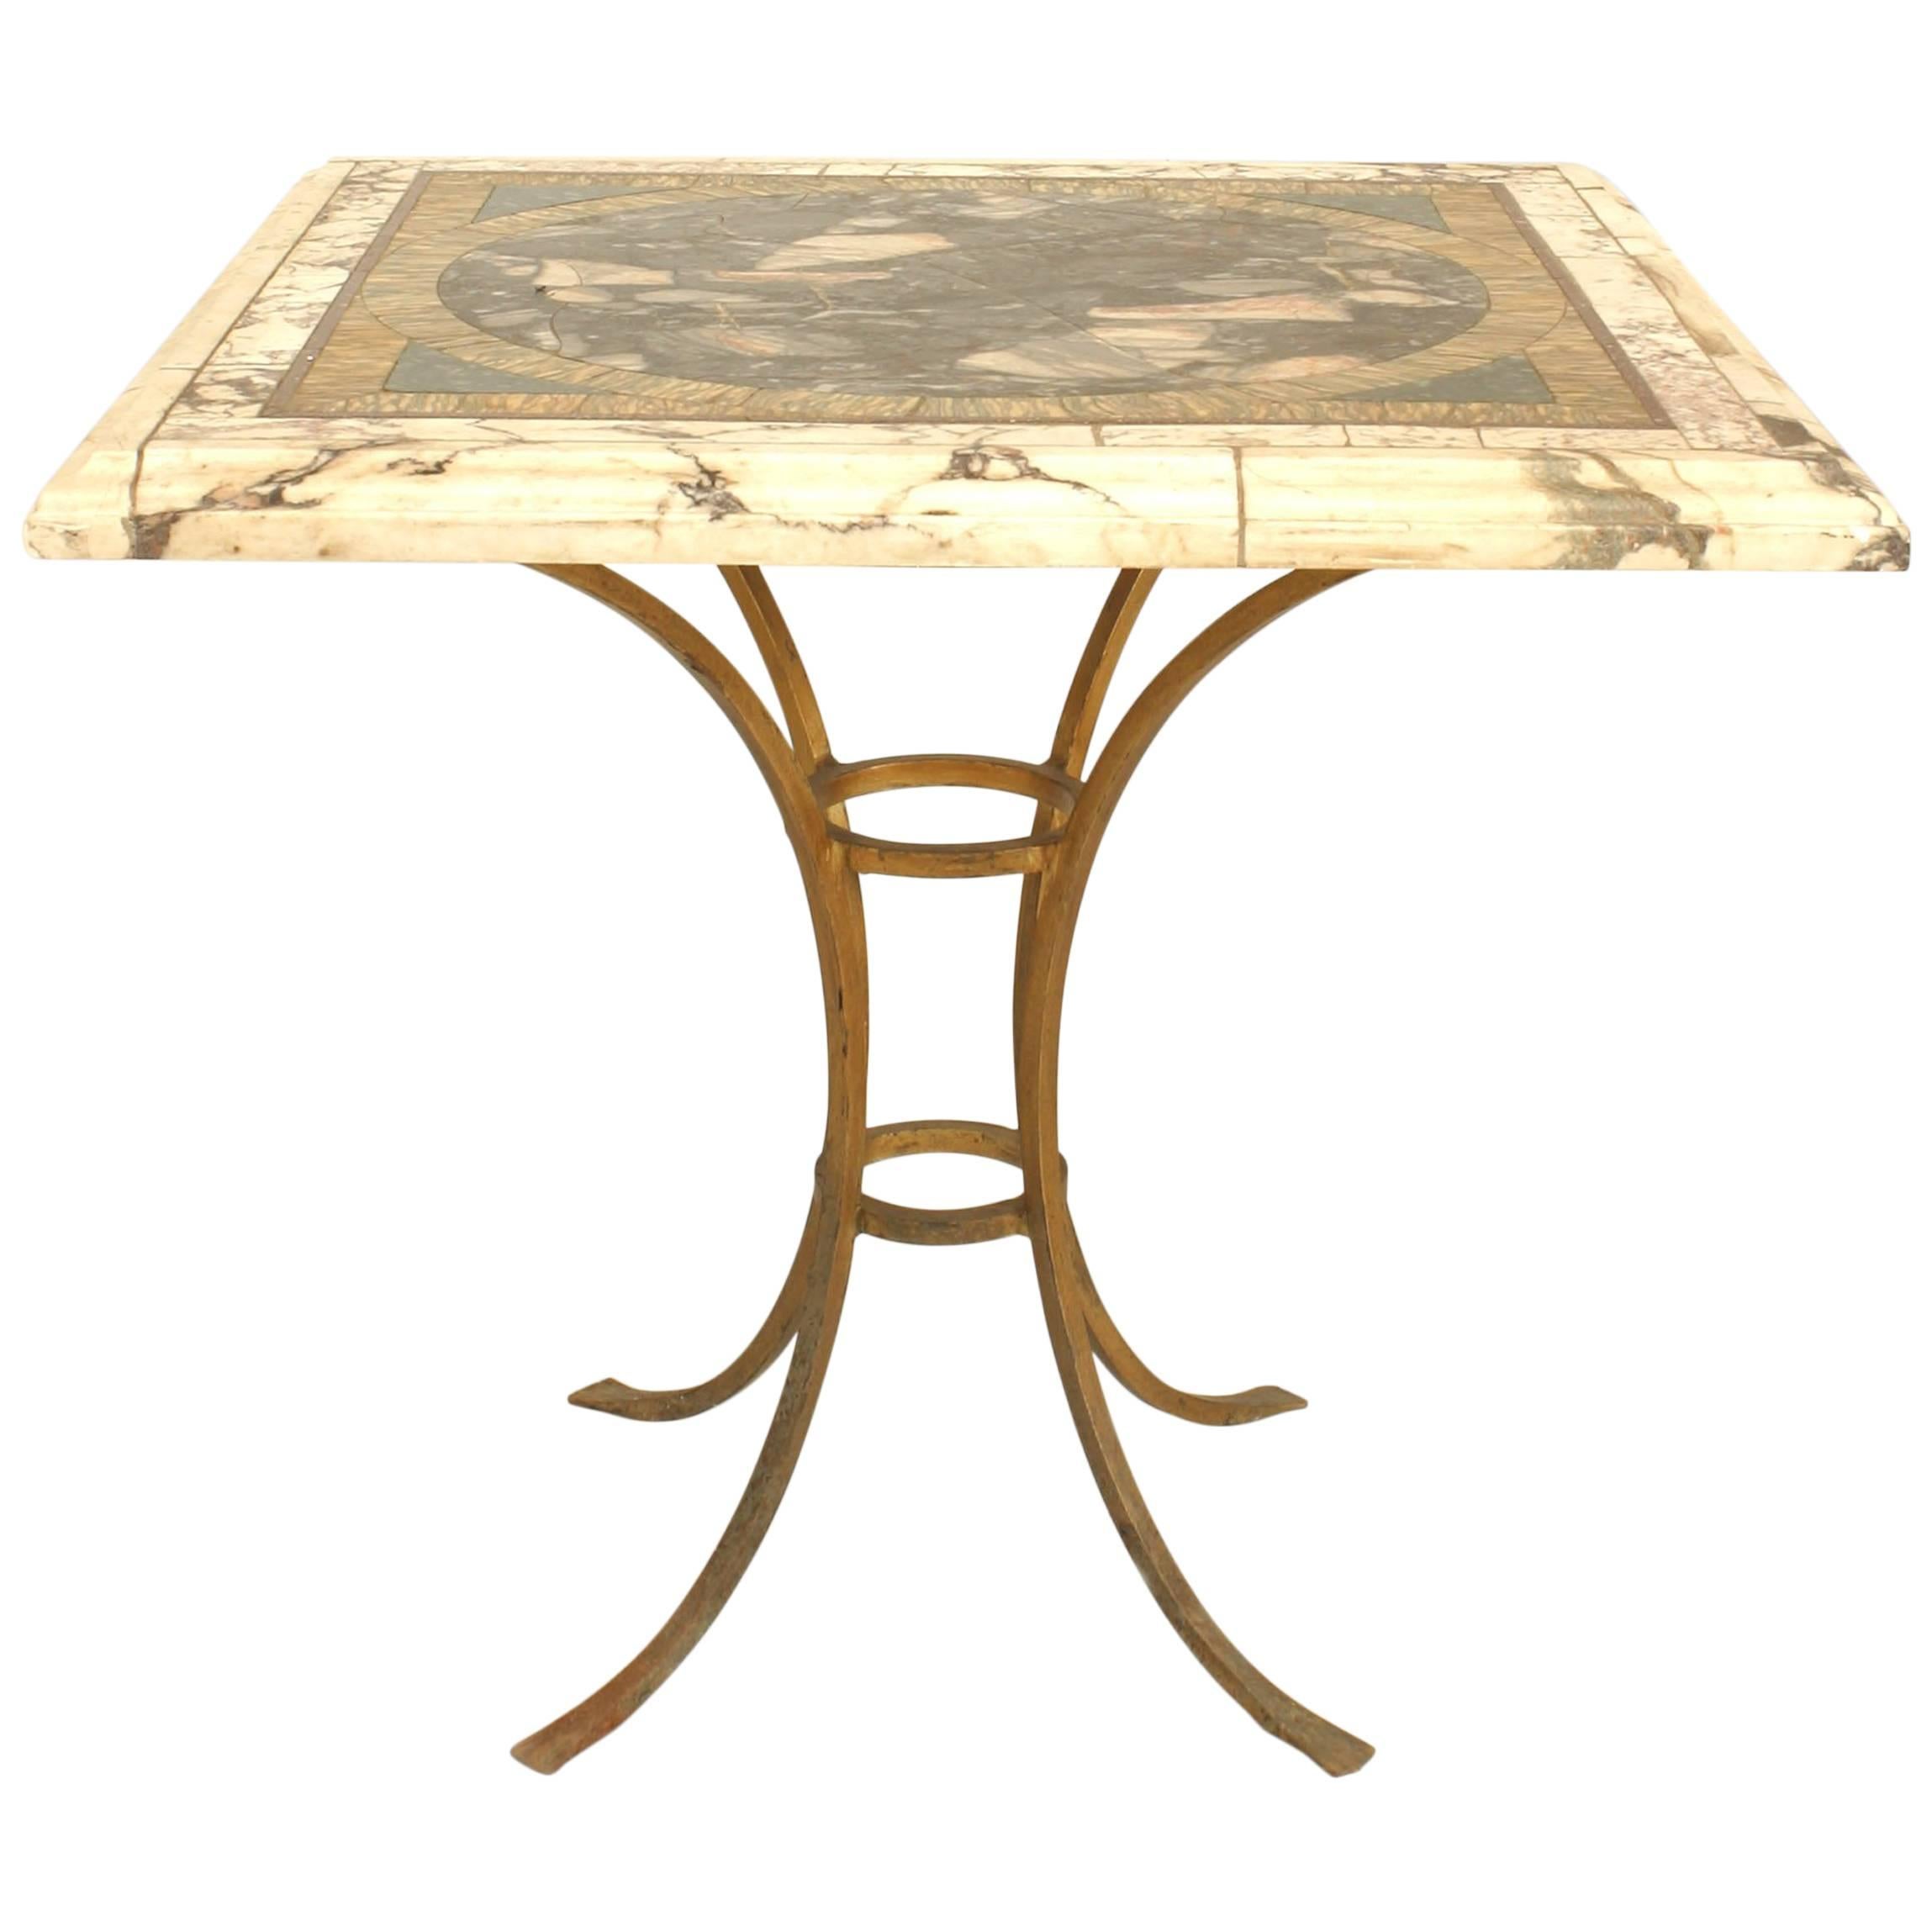 Italian Neo-Classic Marble End Table For Sale